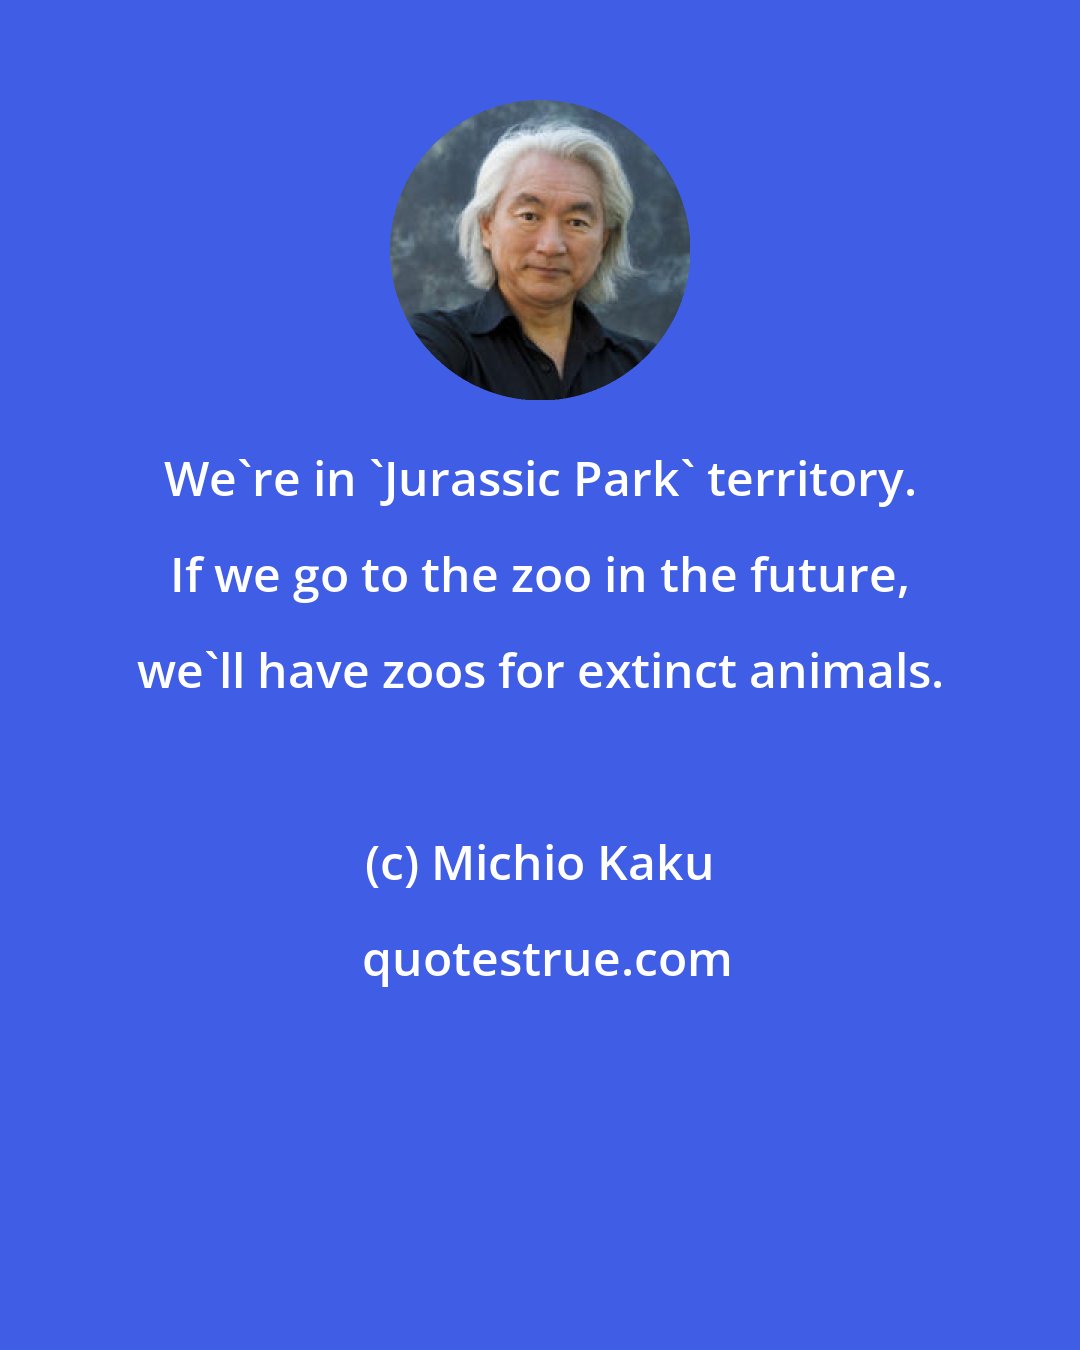 Michio Kaku: We're in 'Jurassic Park' territory. If we go to the zoo in the future, we'll have zoos for extinct animals.